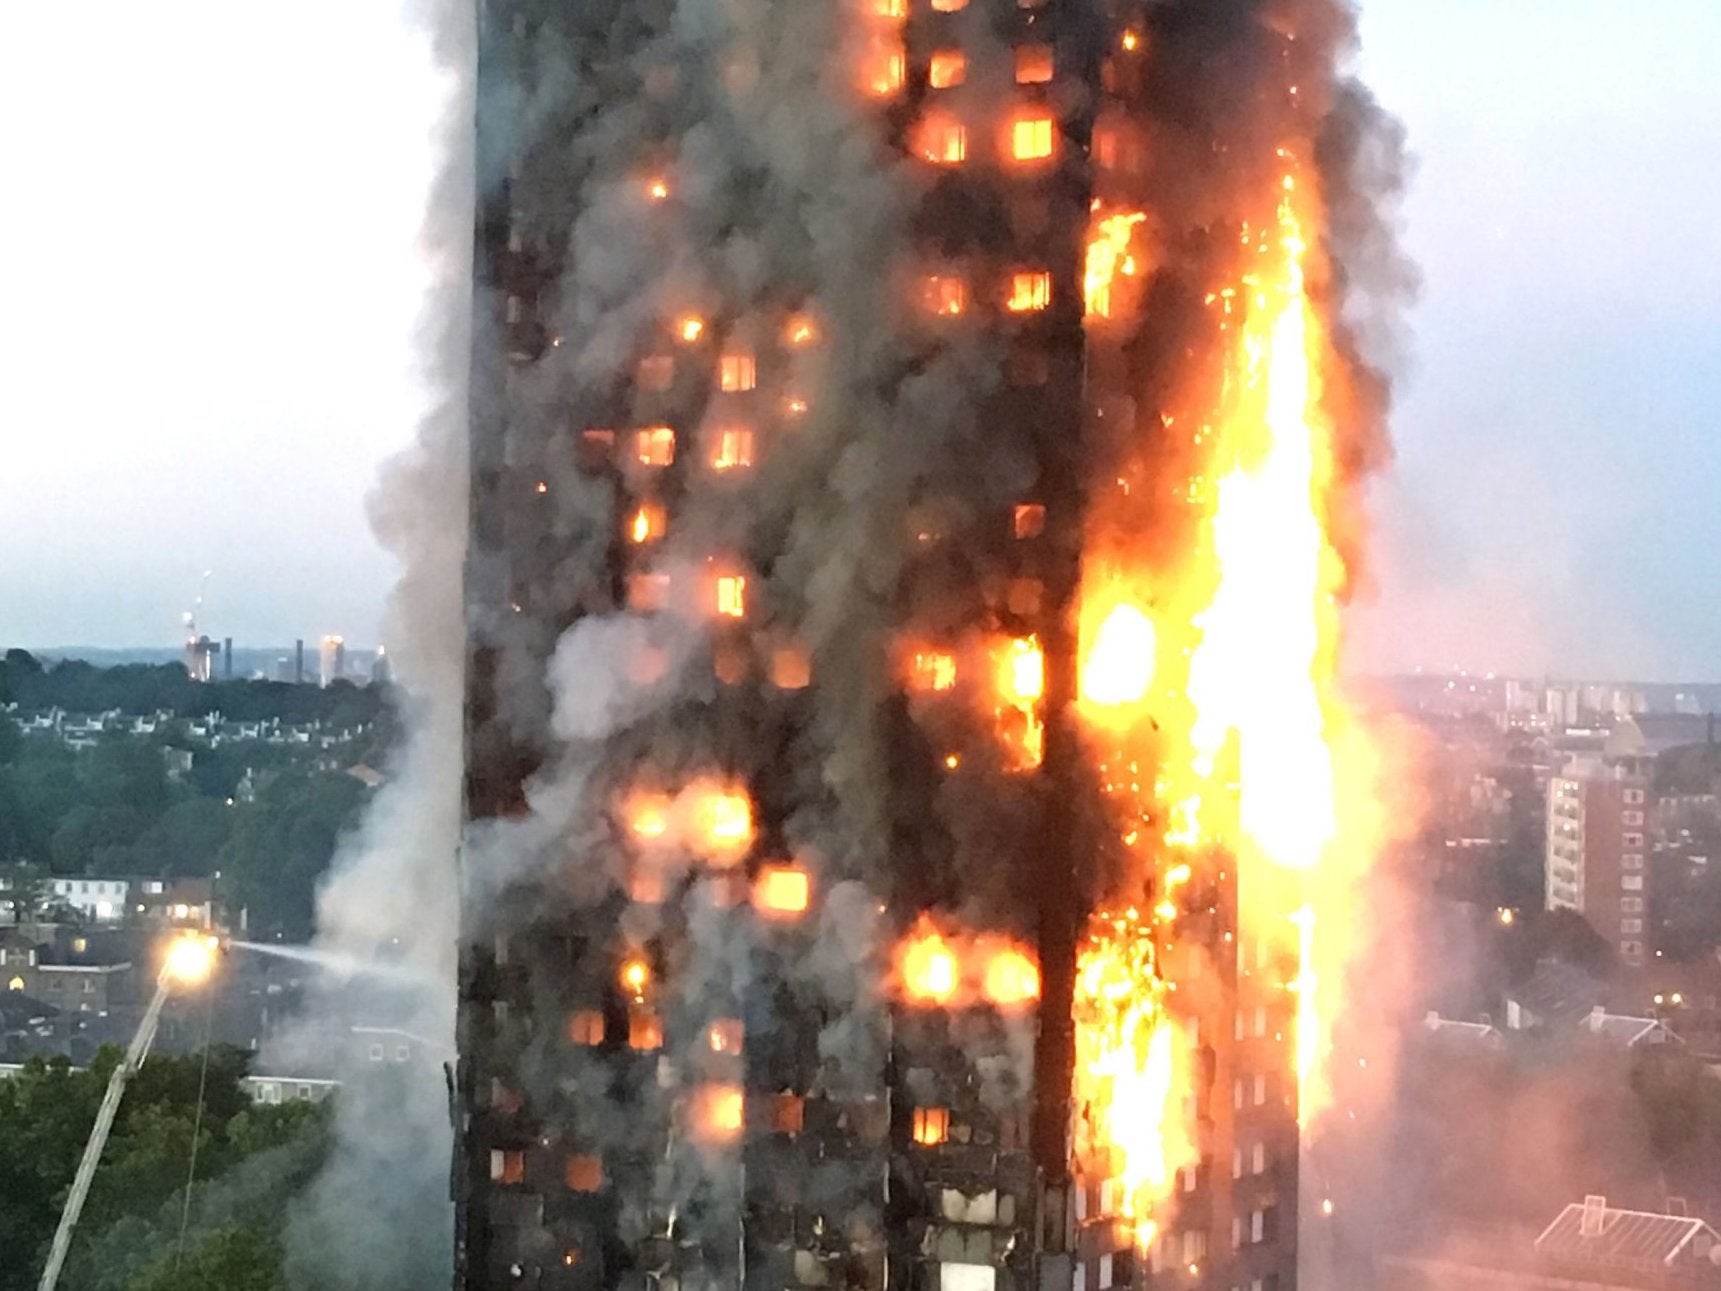 The firefighter tried to get residents to leave the flaming tower by banging on doors